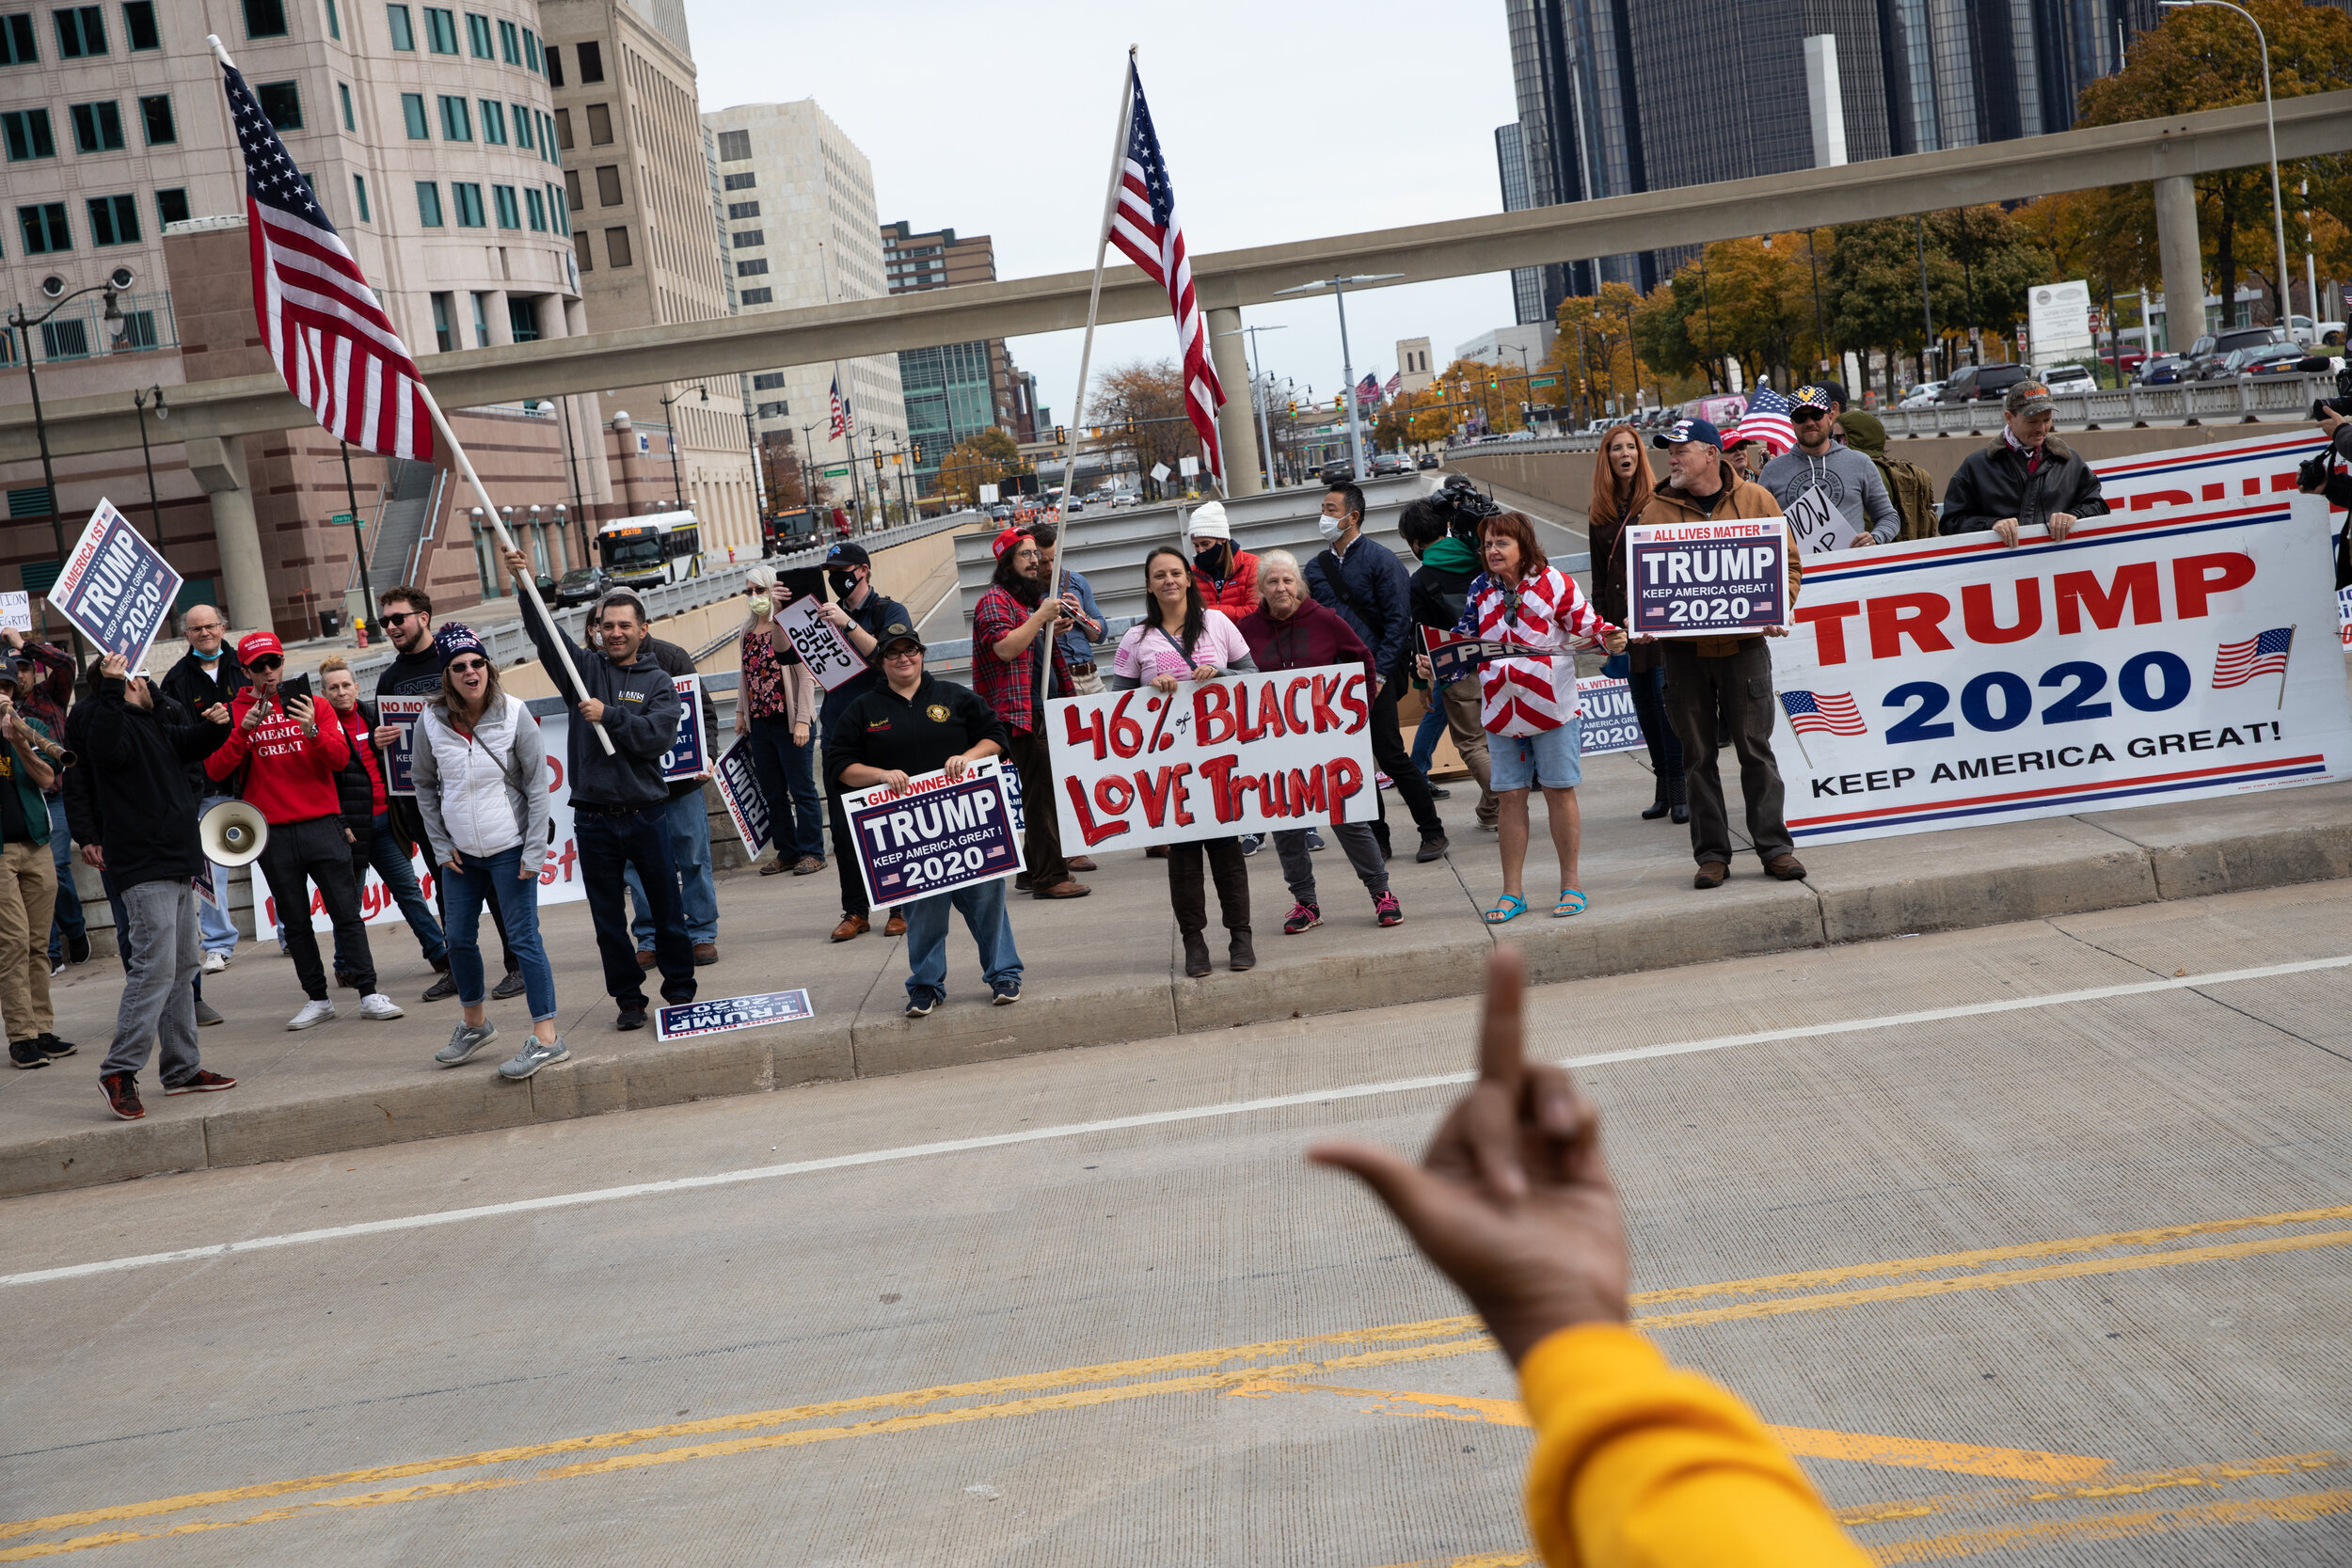  Trump supporters protesting ballot counts were met by counter protestors outside the TCF Center a day after the 2020 presidential election on Nov. 5, 2020 in Detroit, Michigan. (For Bloomberg) 